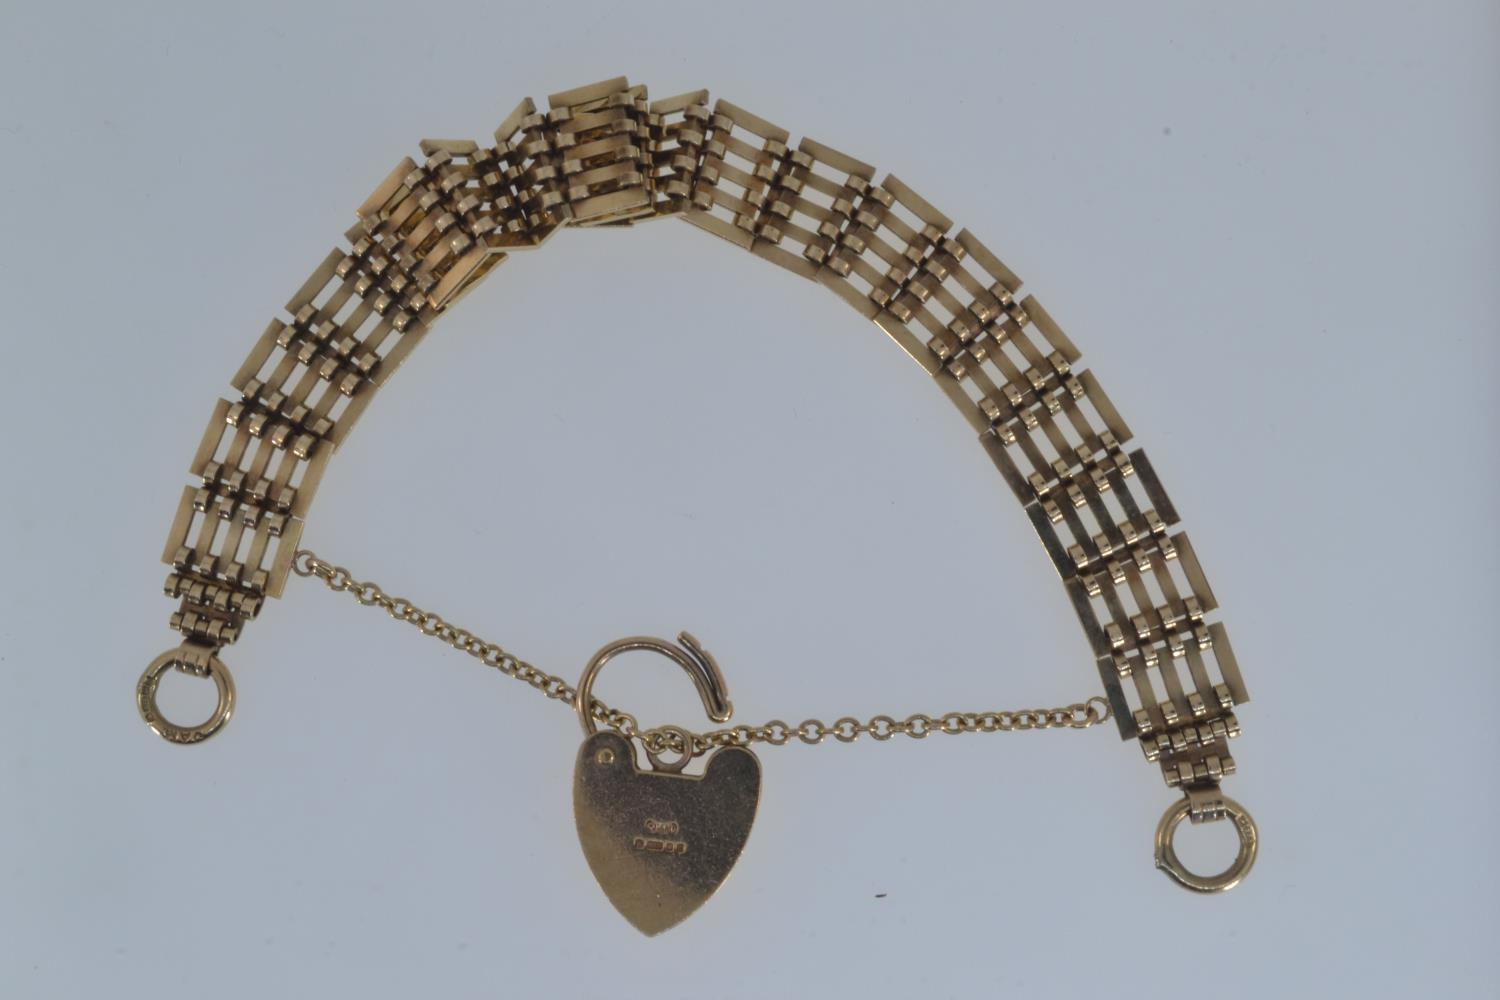 9ct gold gate link bracelet with a heart-shaped padlock clasp, hallmarked London, 15.5 grams - Image 2 of 3